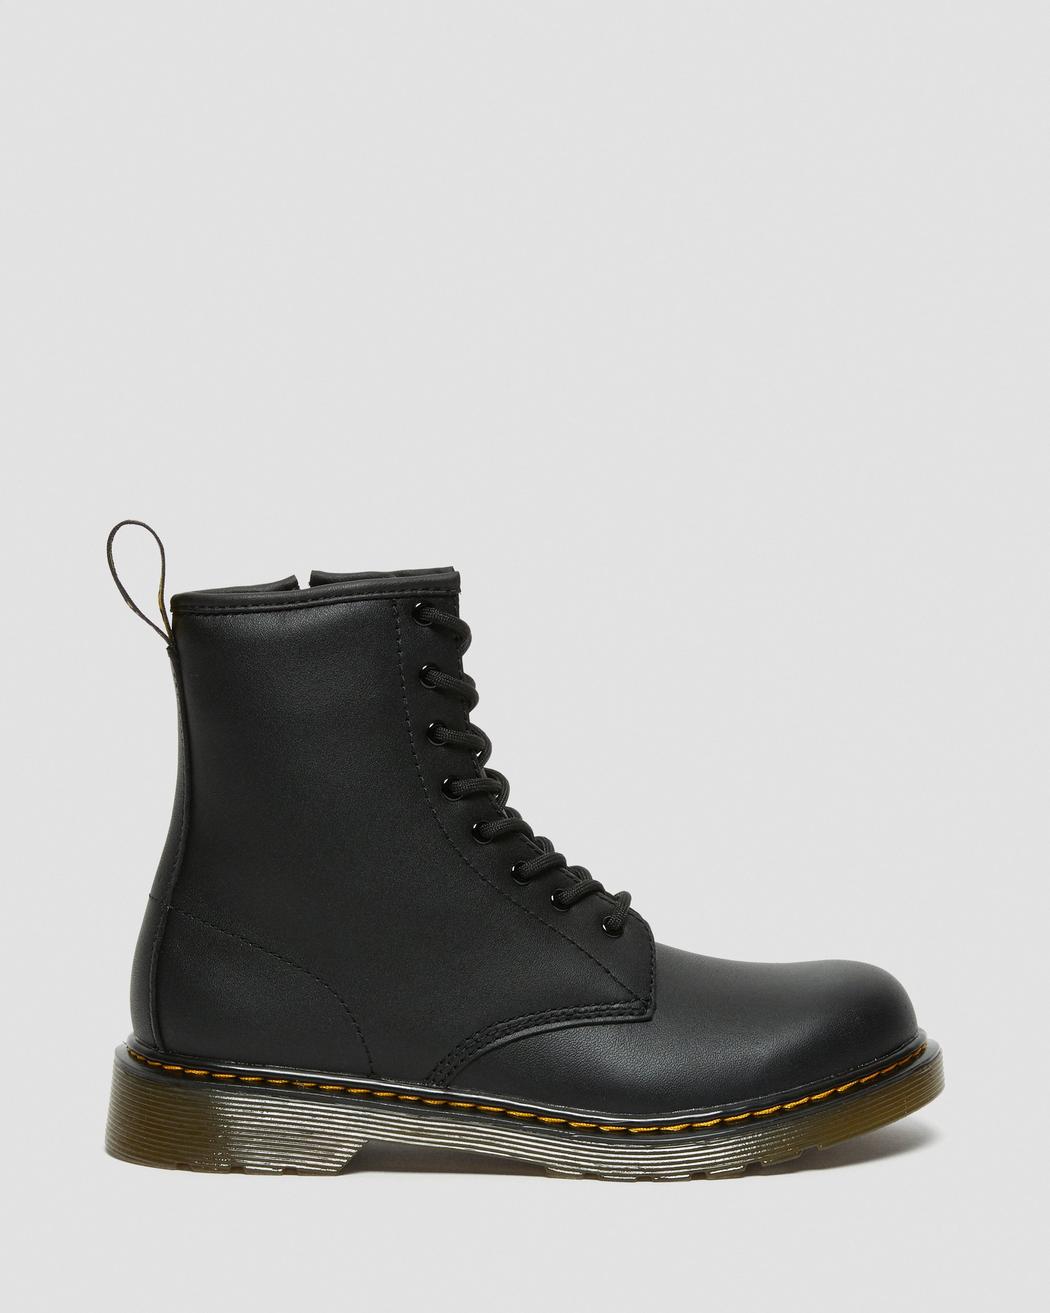 ANFIBI 1460 Y BLACK SOFTY T DR.MARTENS UNISEX BAMBINO